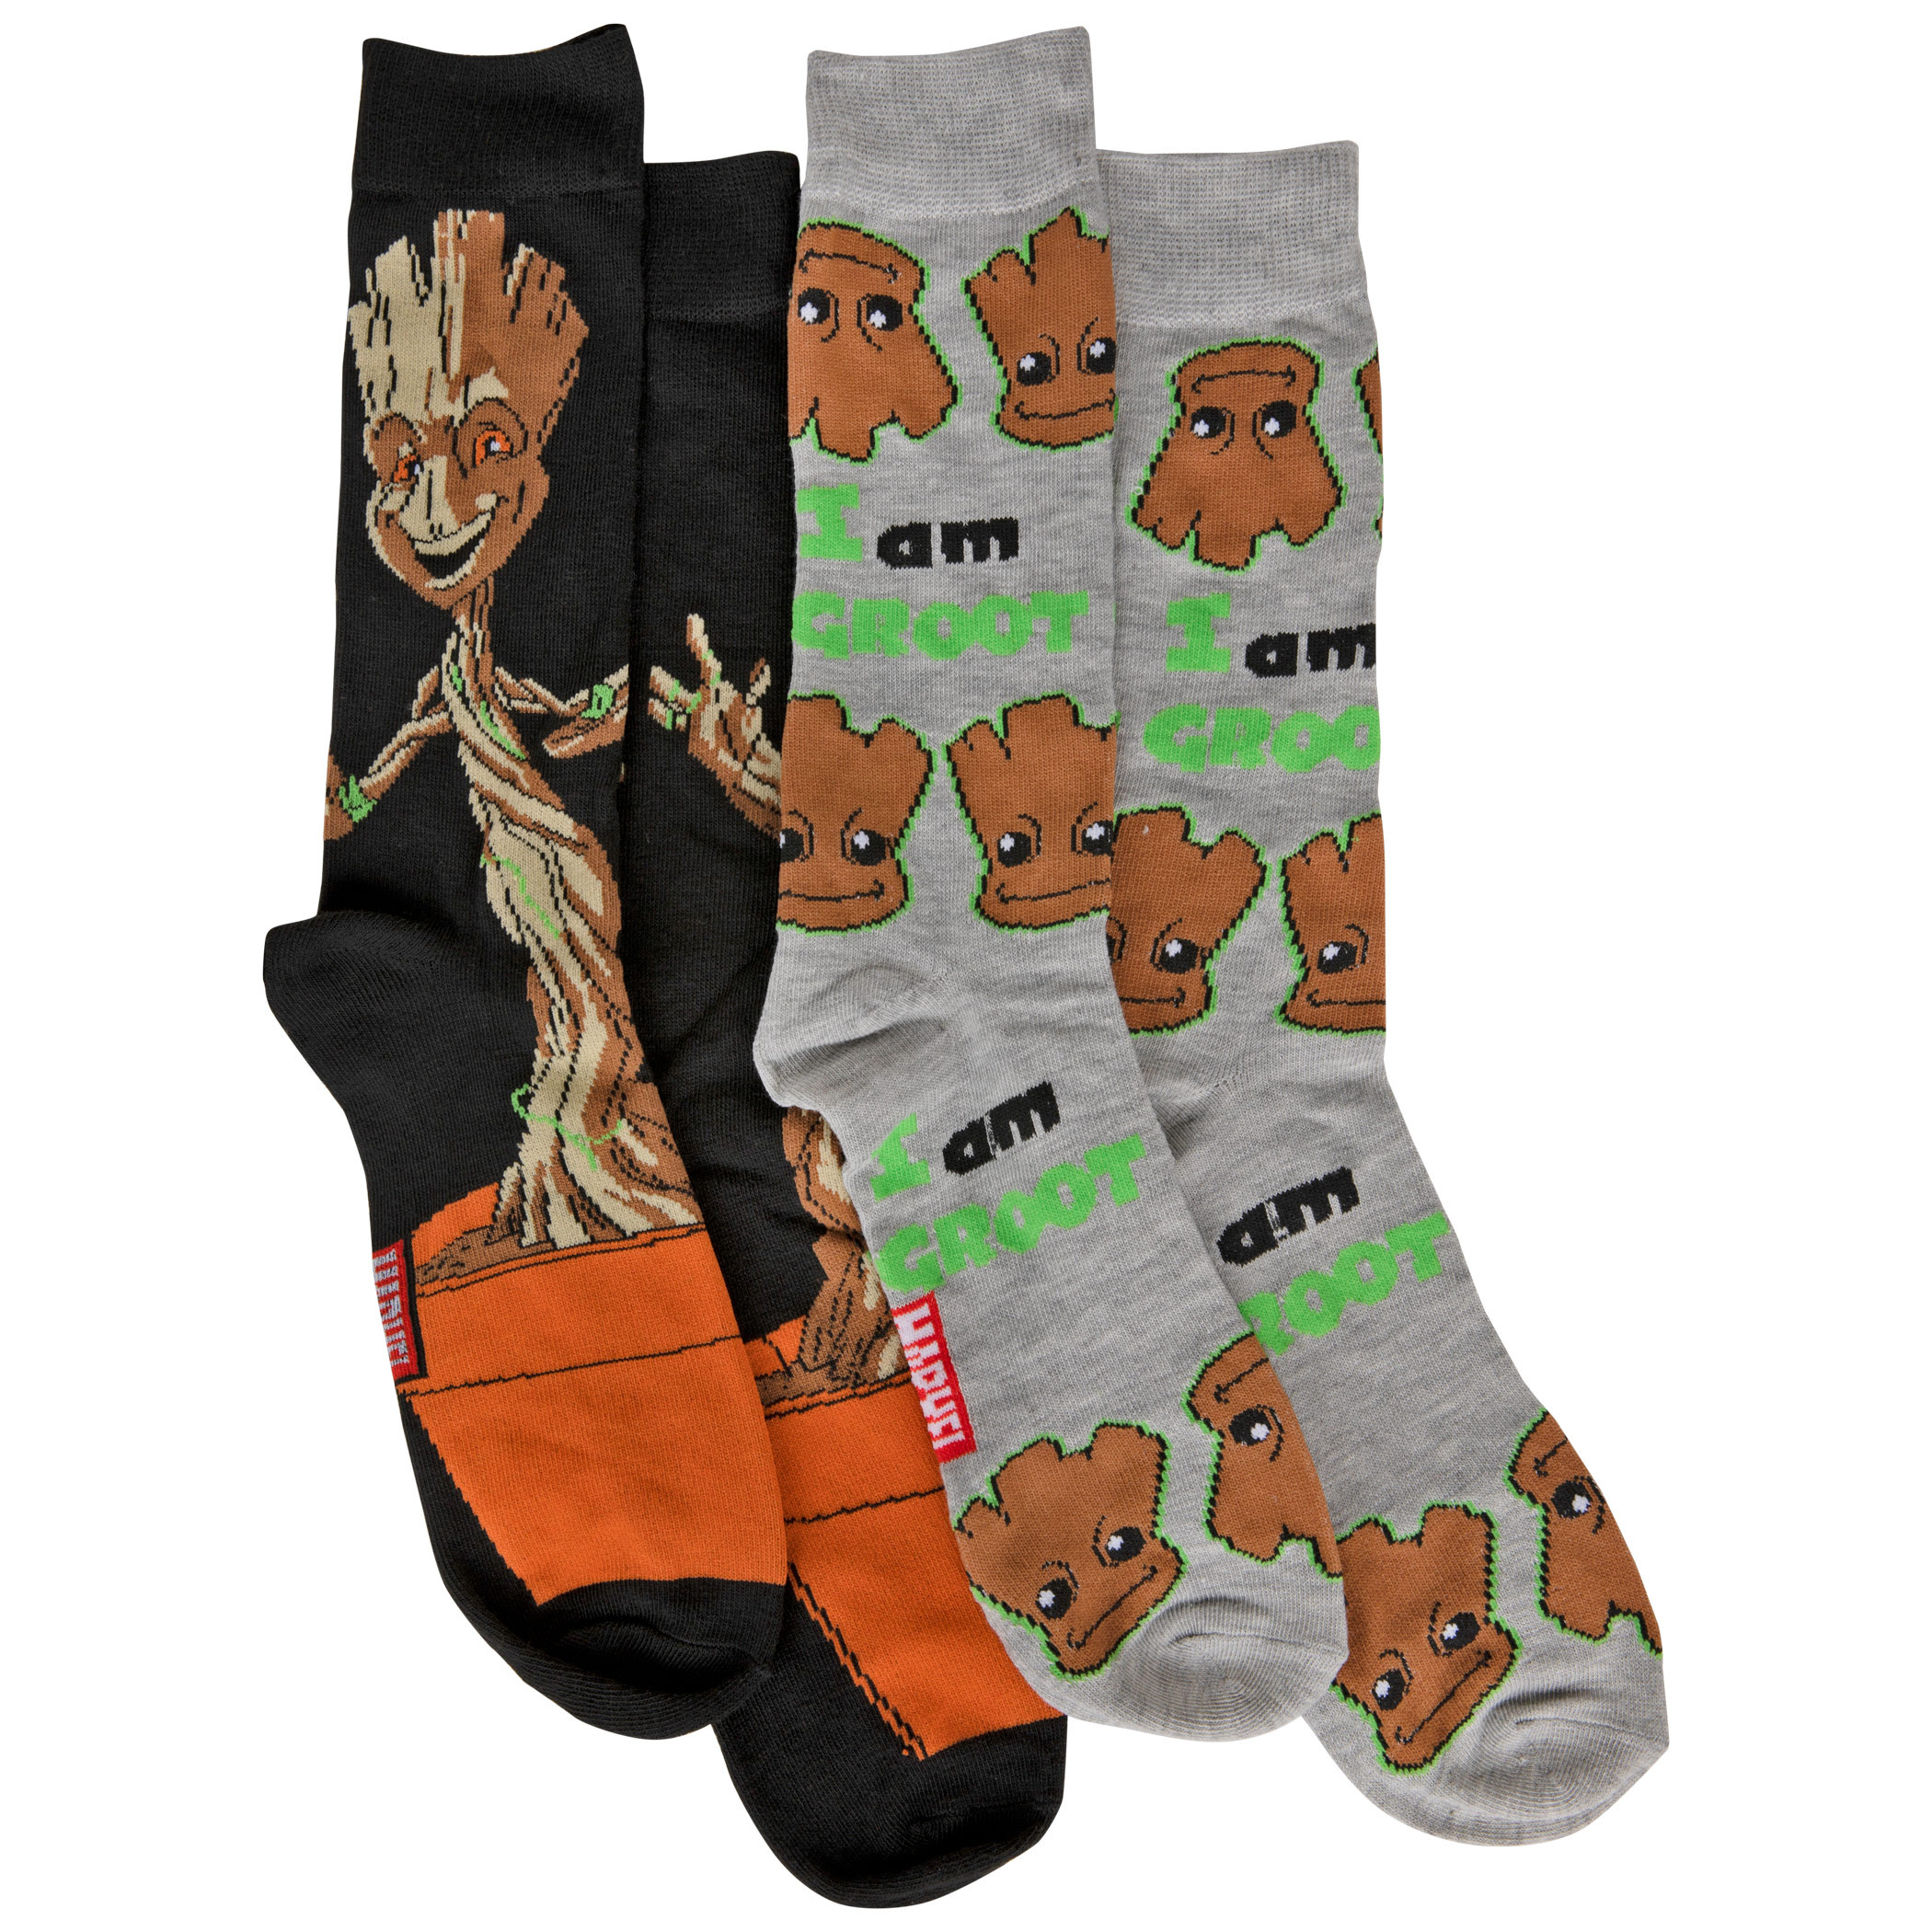 Guardians of the Galaxy I Am Groot 2-Pair Pack of Crew Socks